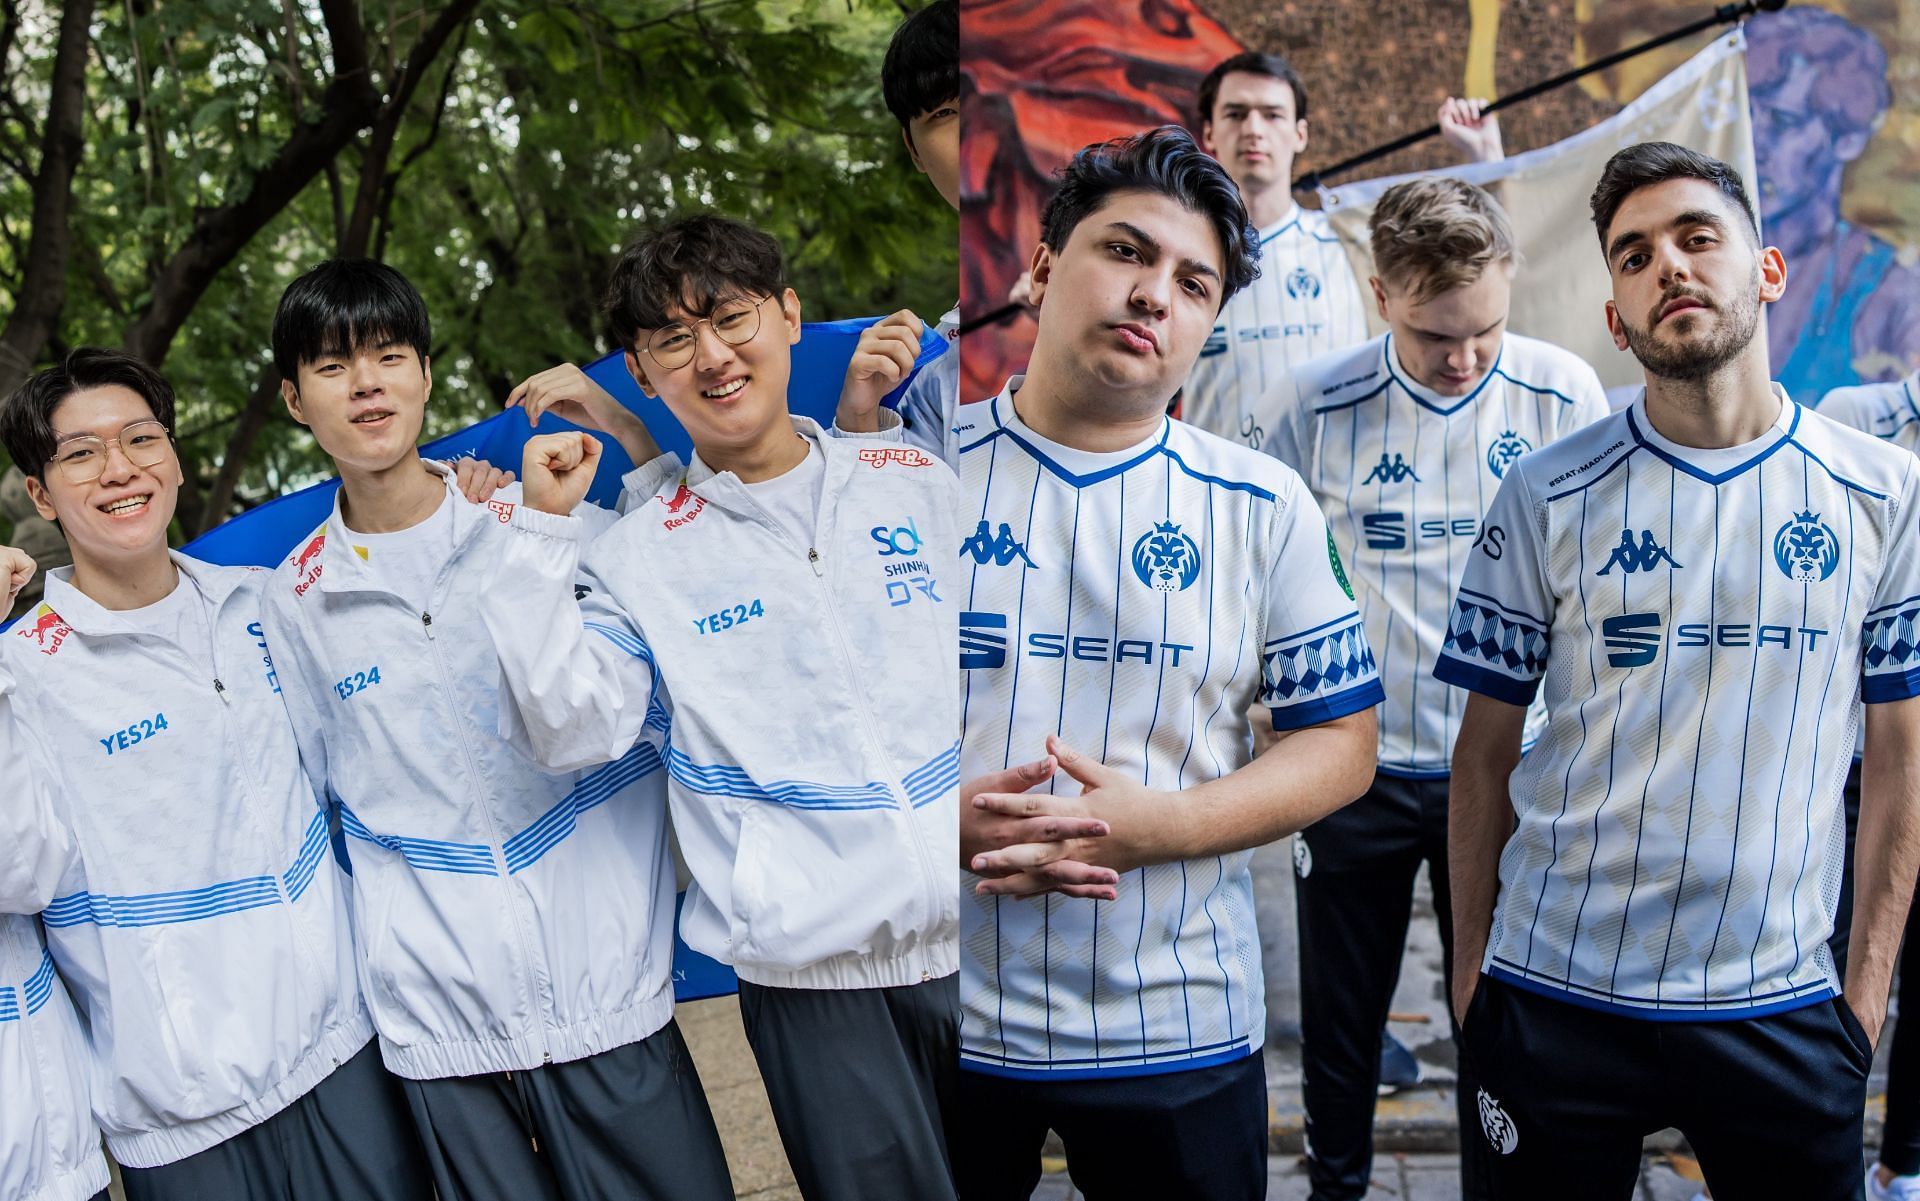 DRX vs MAD Lions will be vital for seeding at Worlds 2022 (Image via Riot Games)